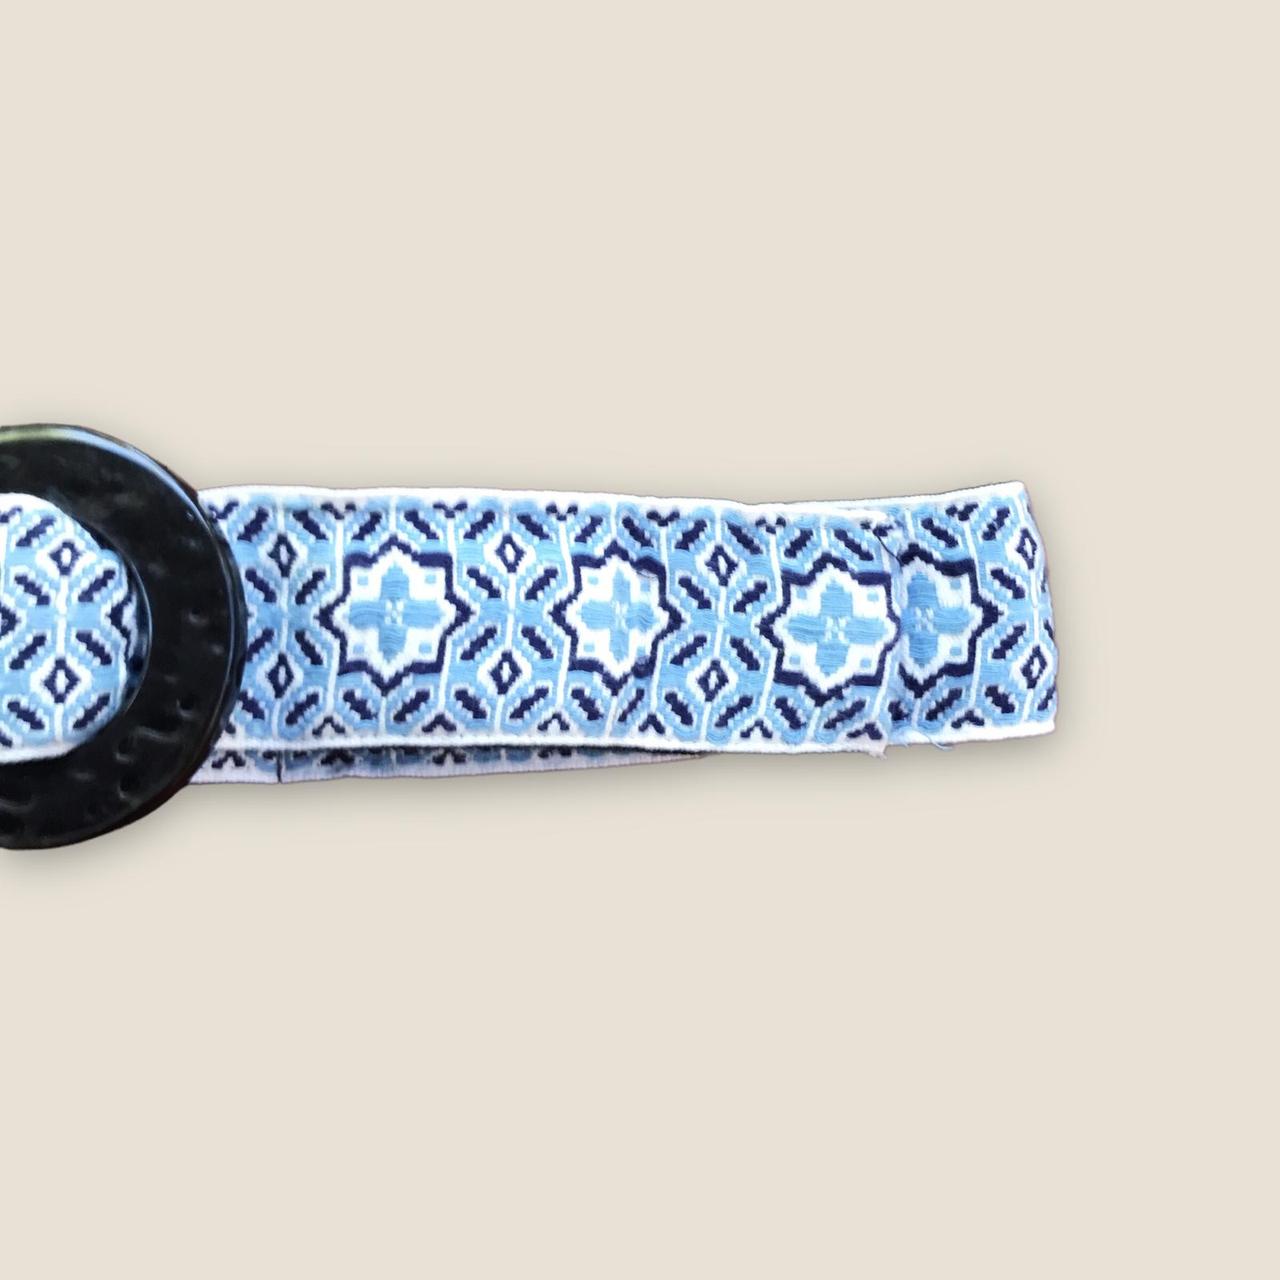 American Vintage Women's Blue and White Belt (2)